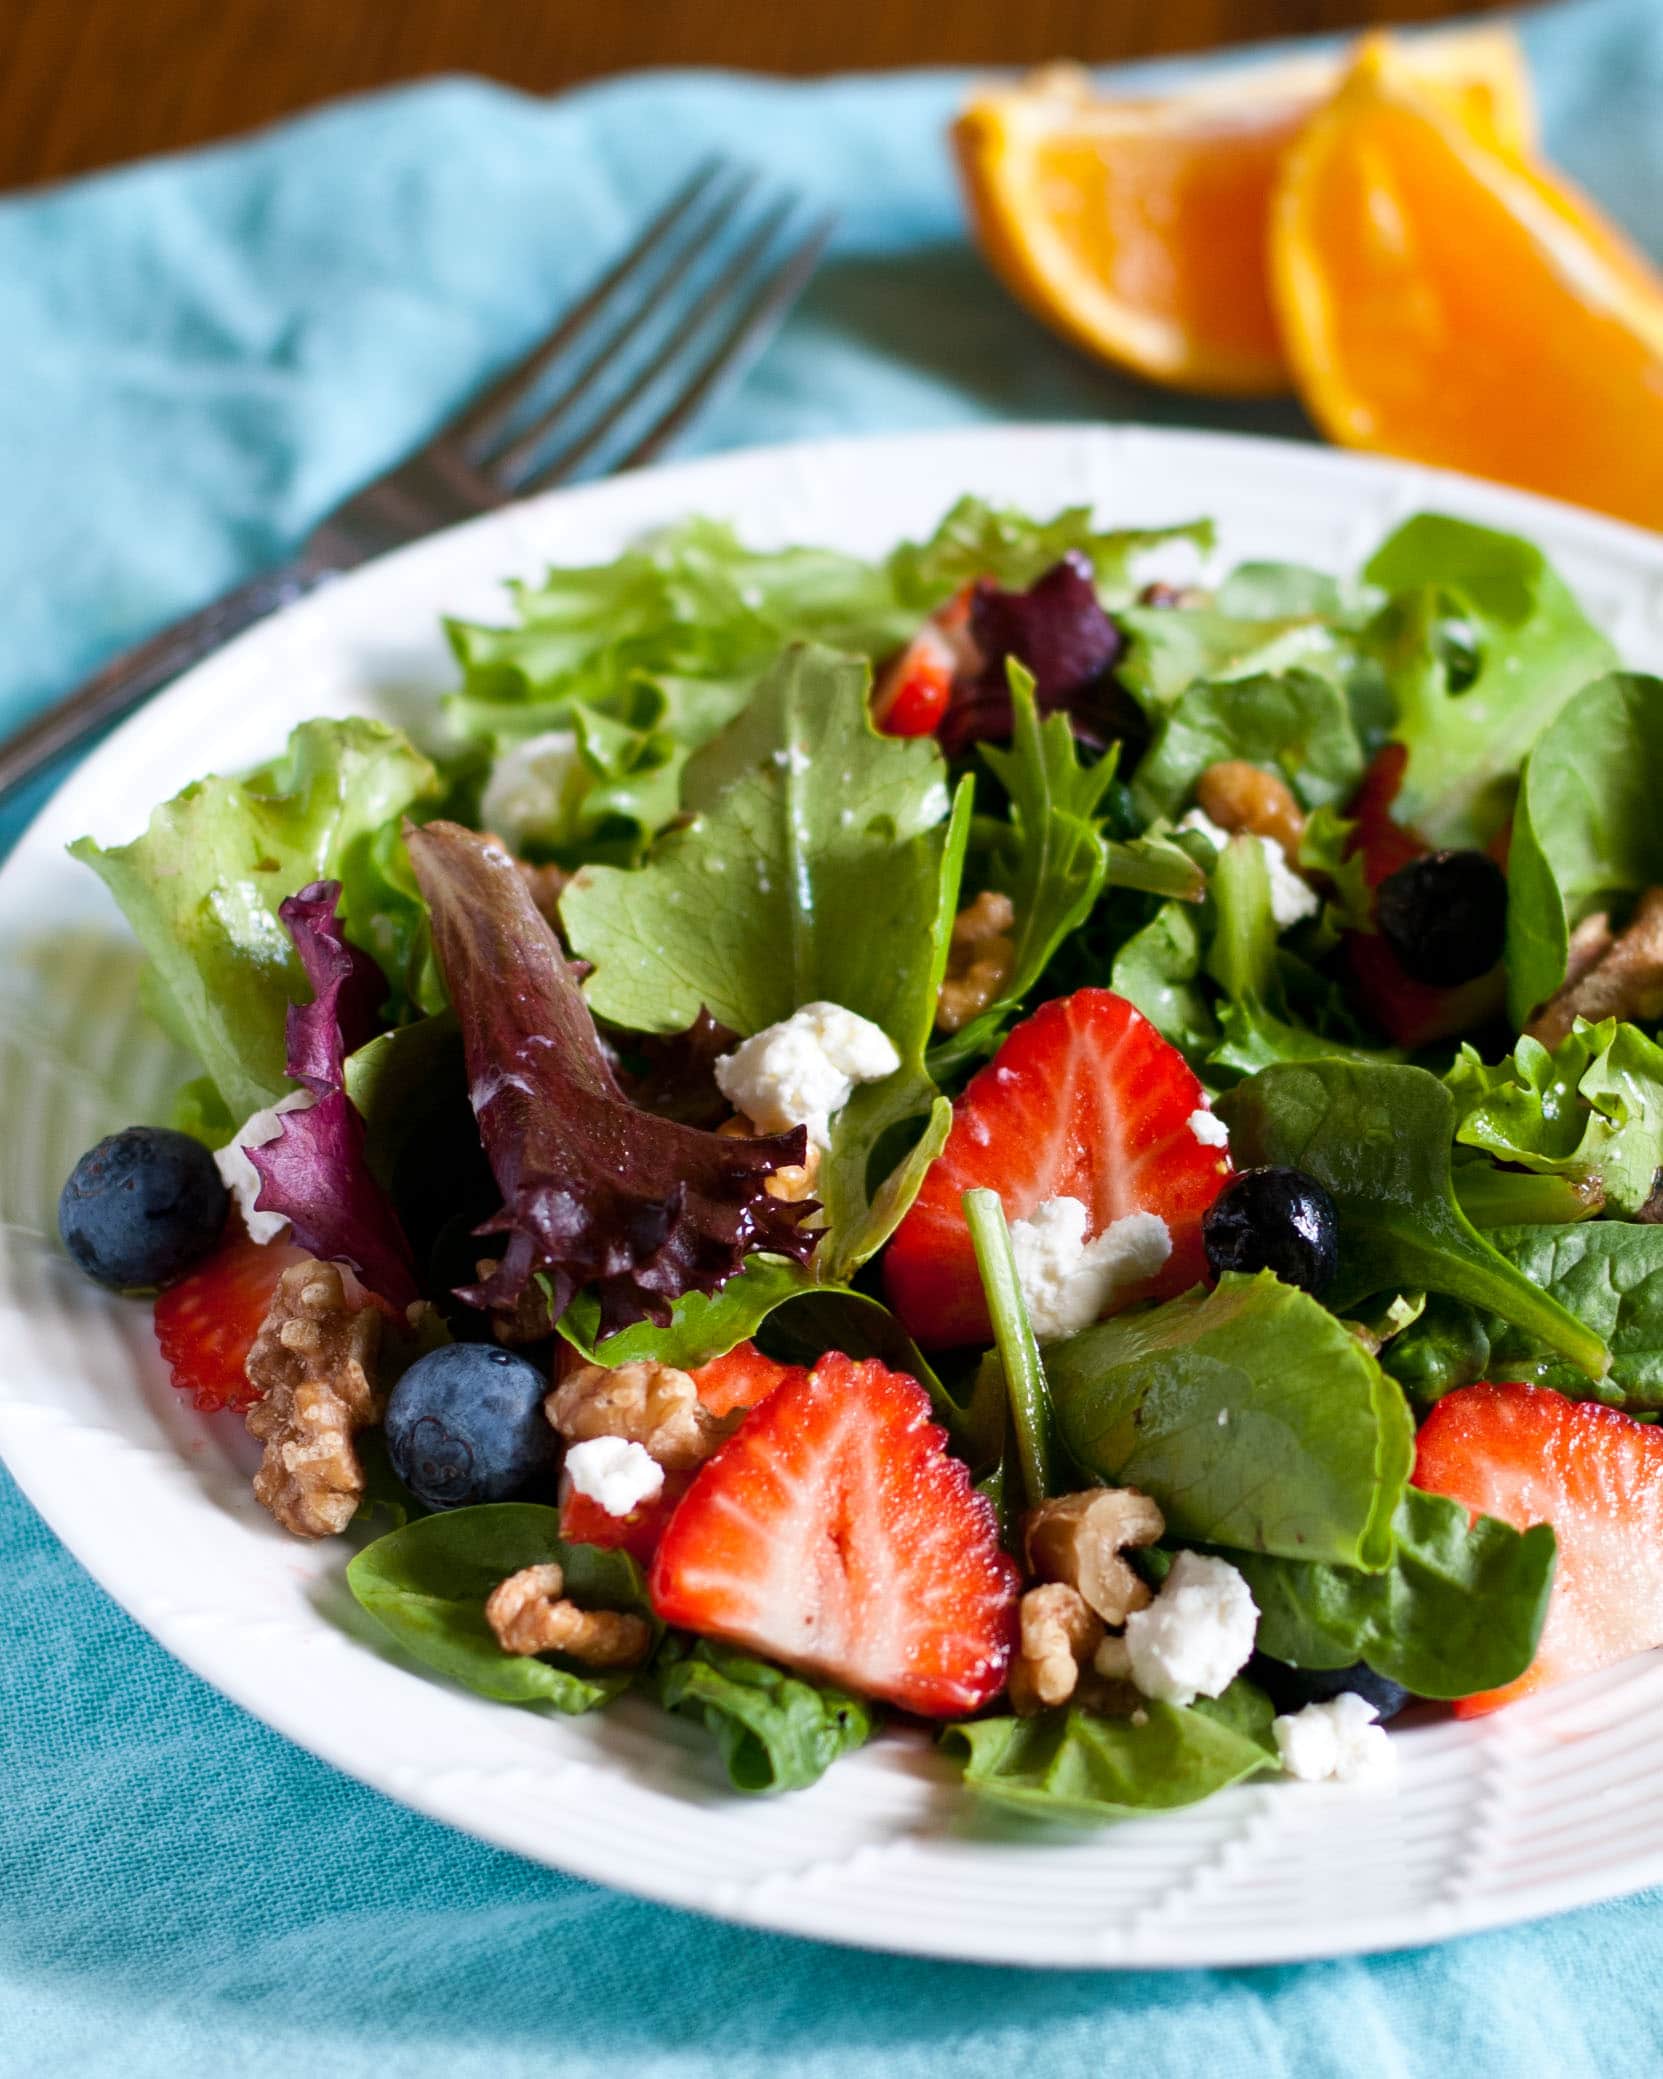 Summer Berry Salad with Roasted Walnuts, Goat Cheese, and Orange Vinaigrette